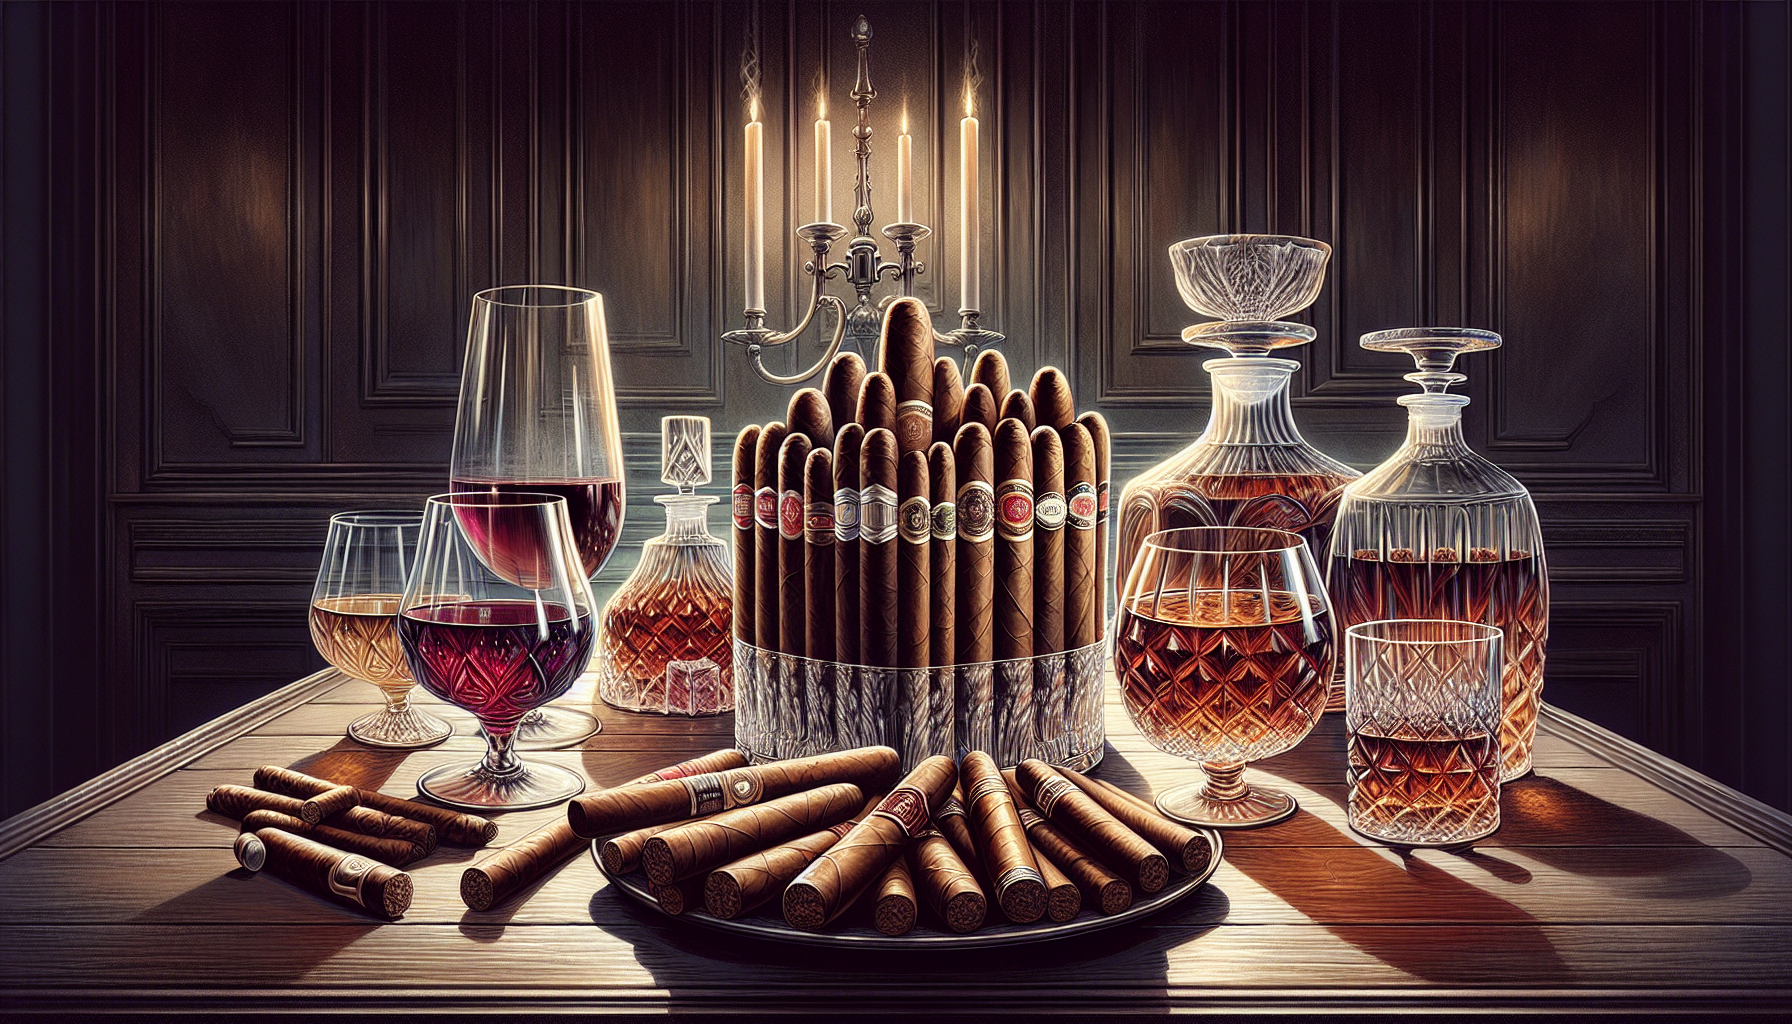 Illustration of a table with cigars, glasses of wine, and spirits, depicting cigar pairings